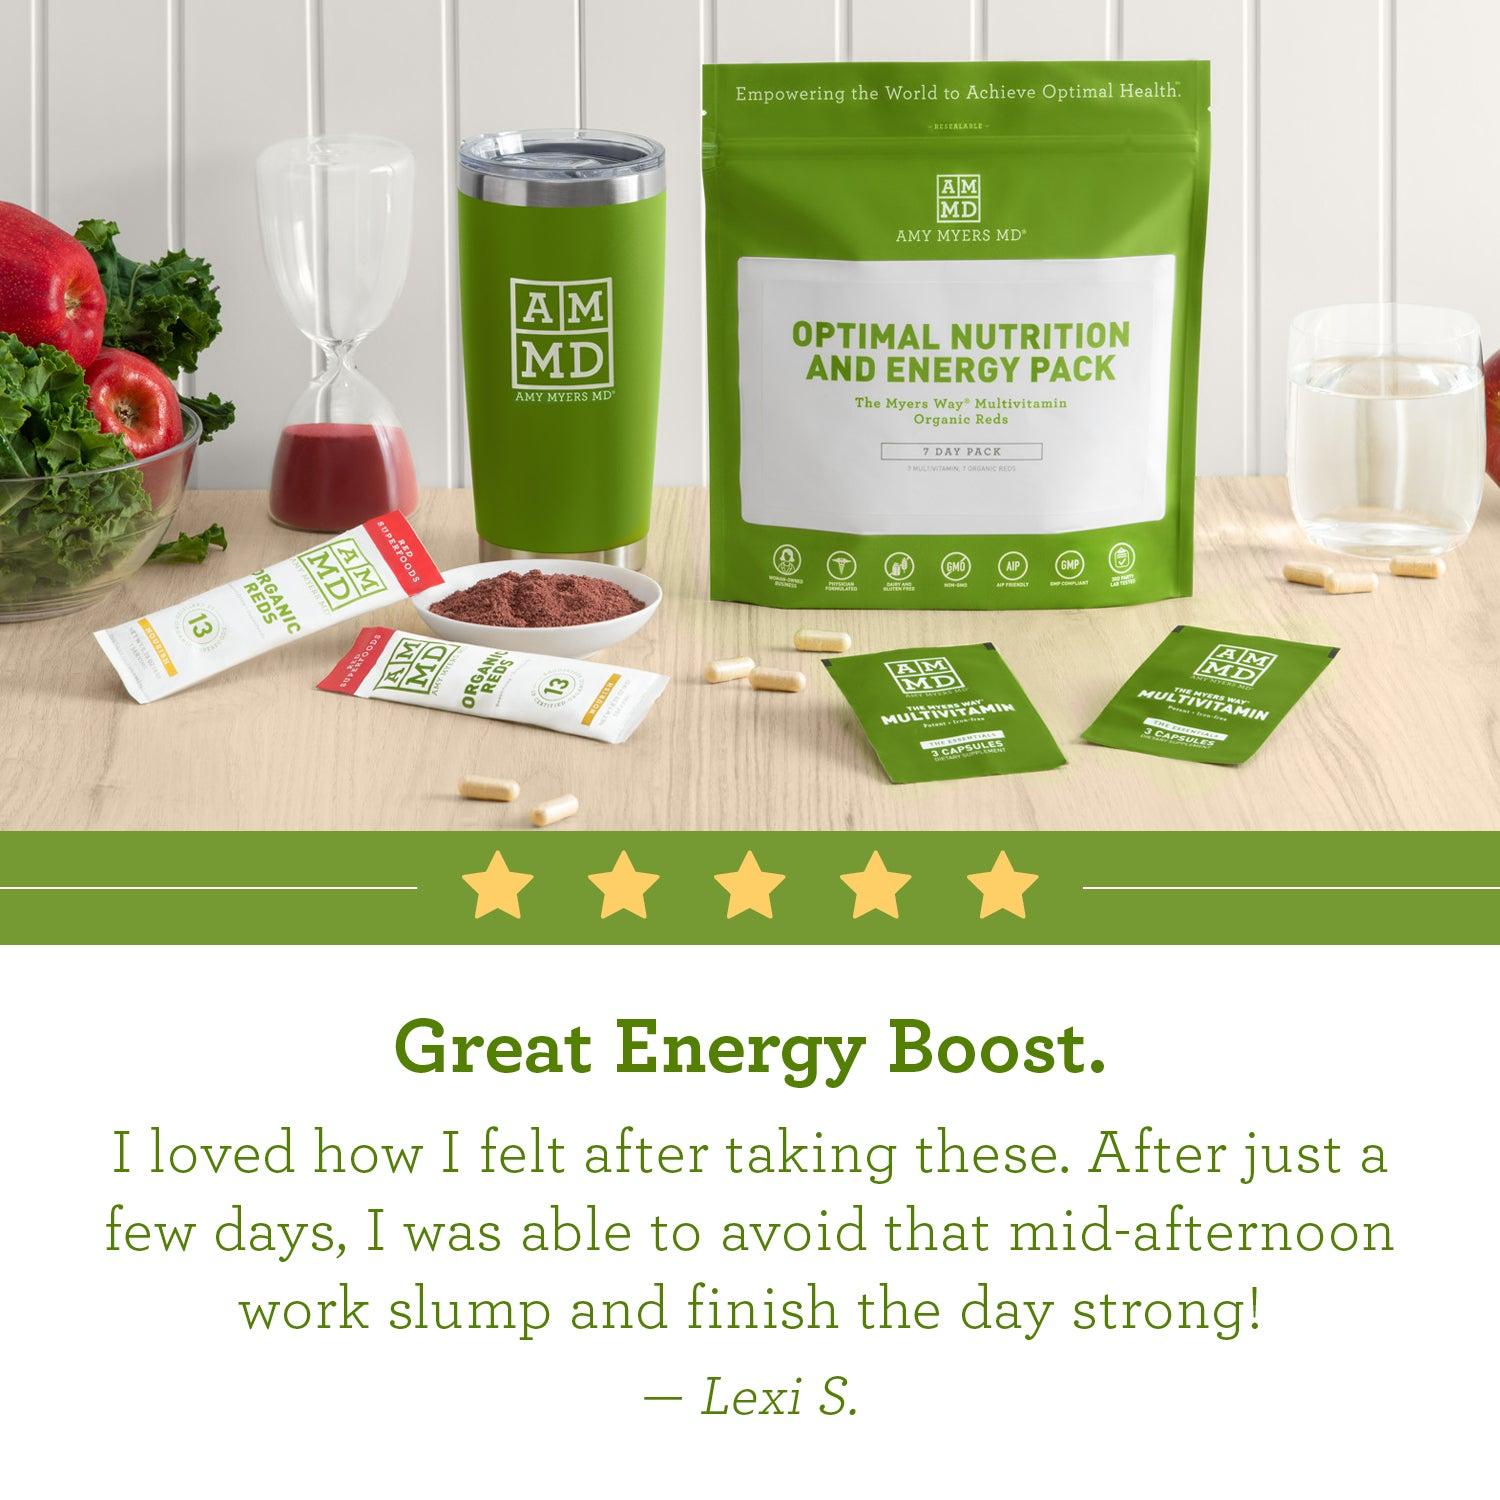 Optimal Nutrition and Energy Pack - Review Image - Amy Myers MD